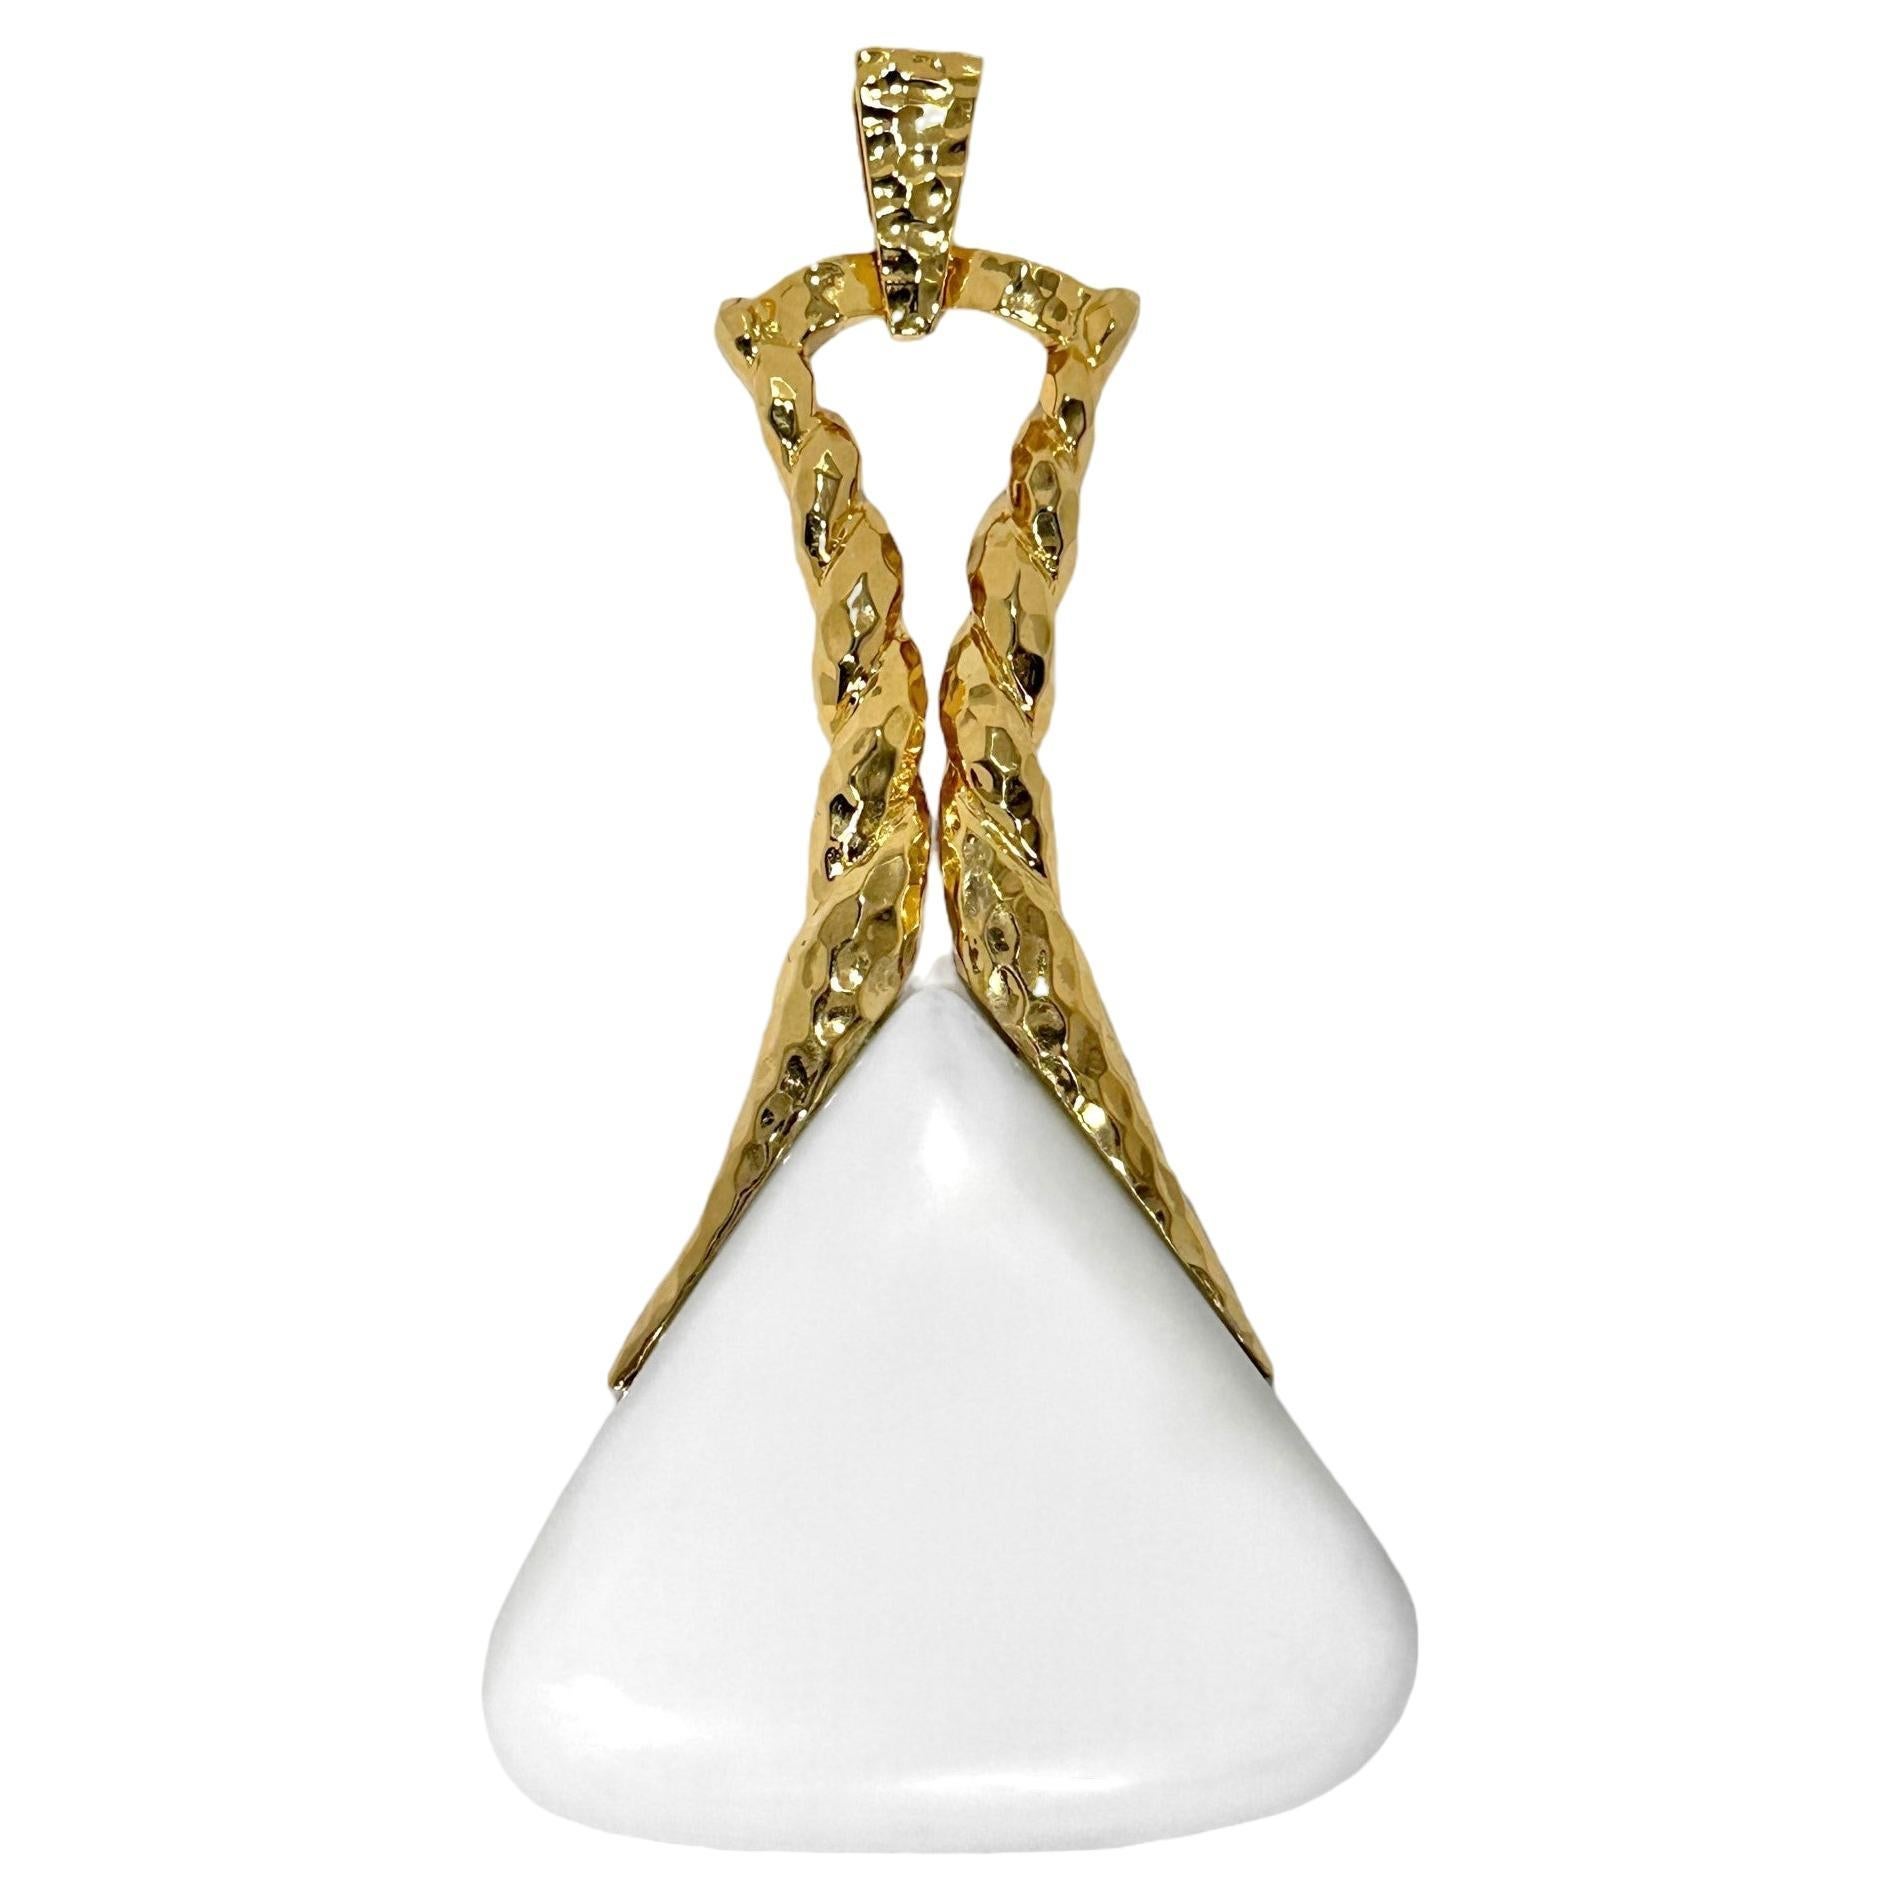 Large, French, Hammered Gold and White Onyx Pendant 4 3/8 Inches Long by Wander